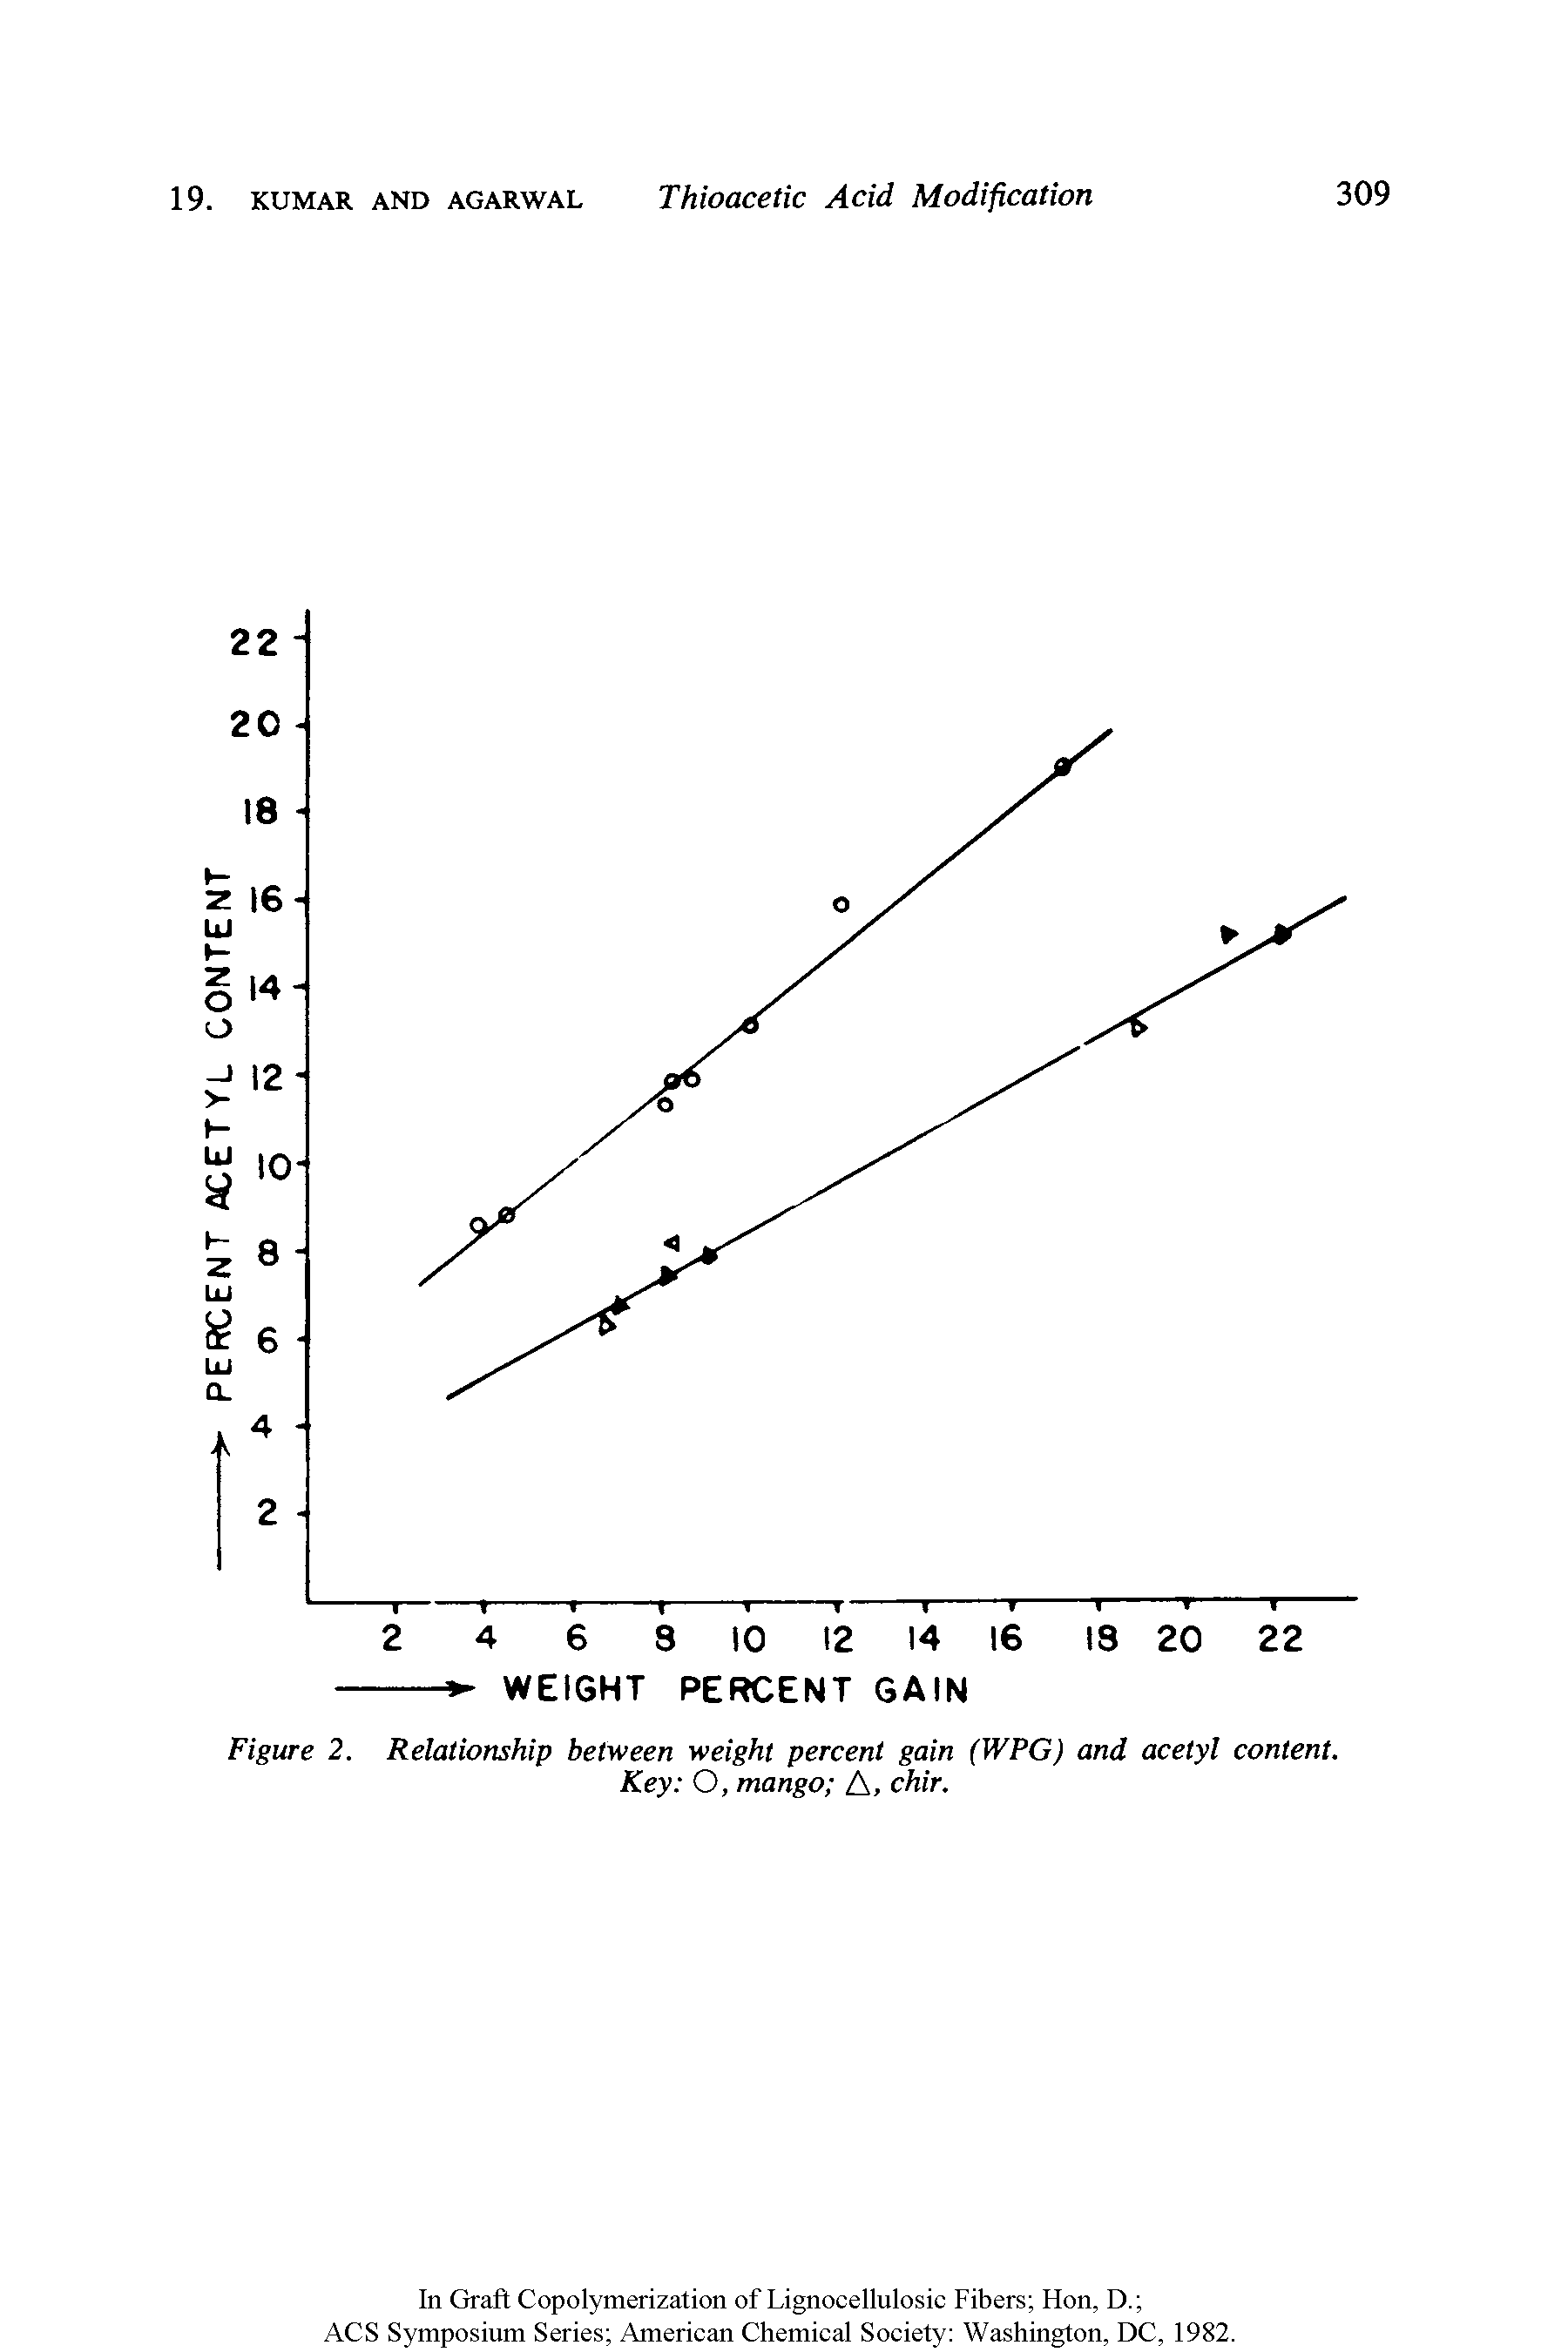 Figure 2. Relationship between weight percent gain (WPG) and acetyl content. Key O, mango A, chir.